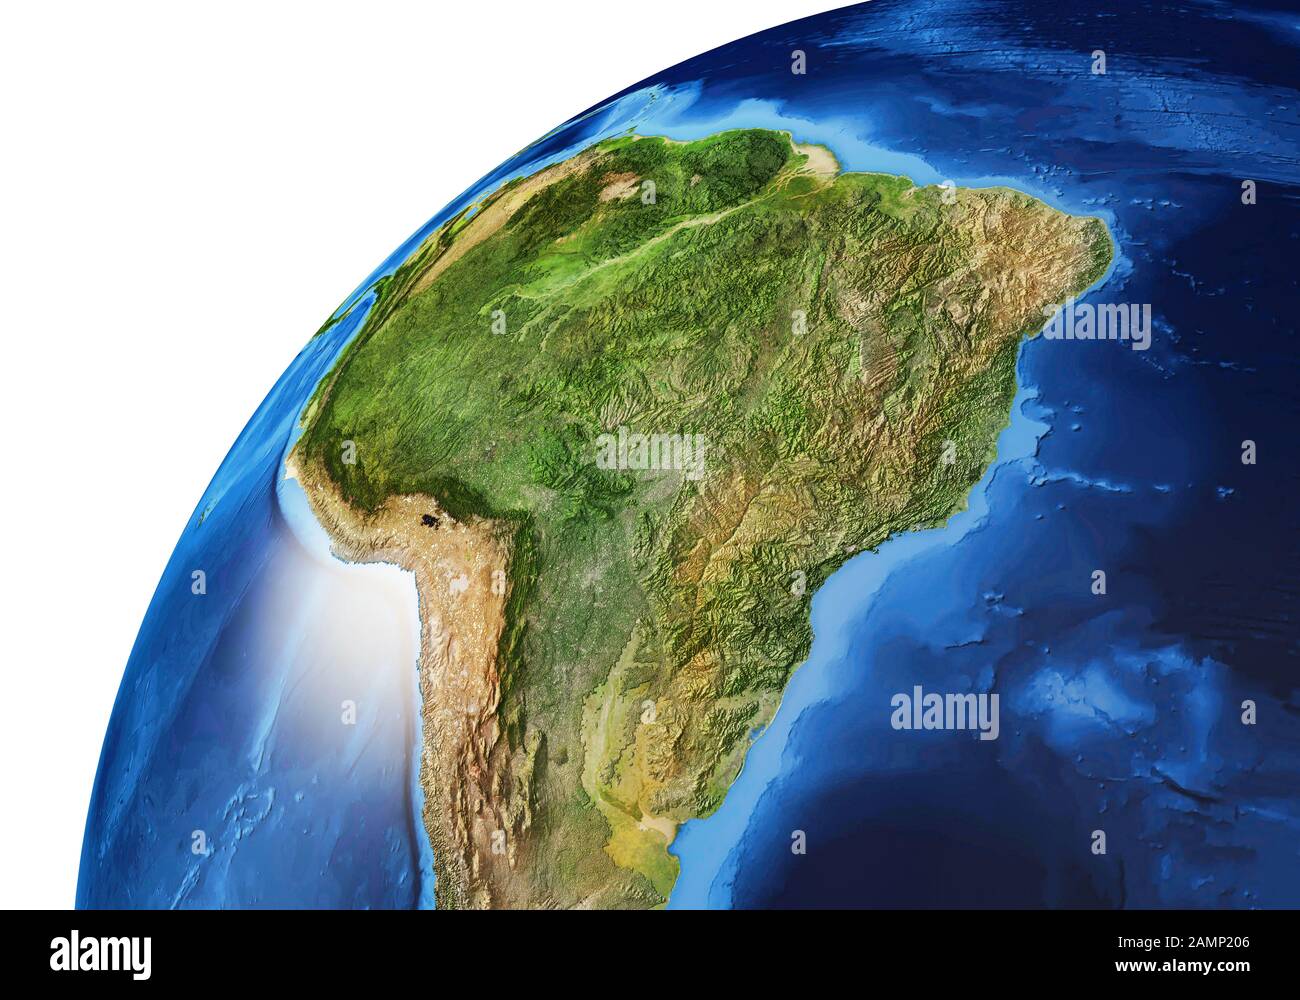 Earth globe close- up of the South America. Very detailed and Photo realistic. (Original maps provided by NASA.) Stock Photo